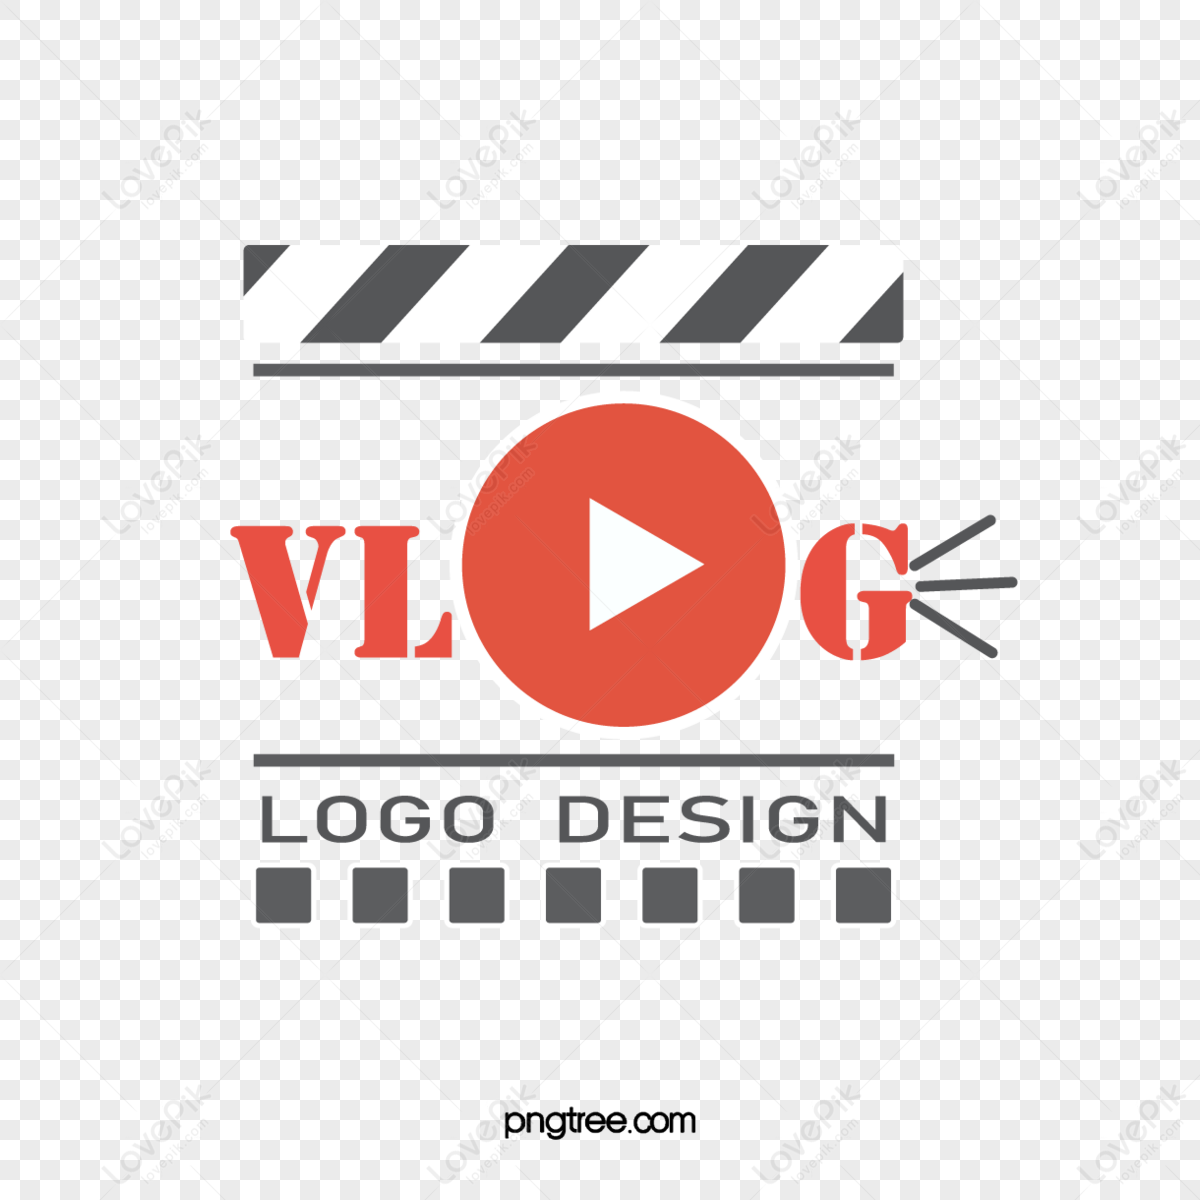 Vlogs png images | PNGWing